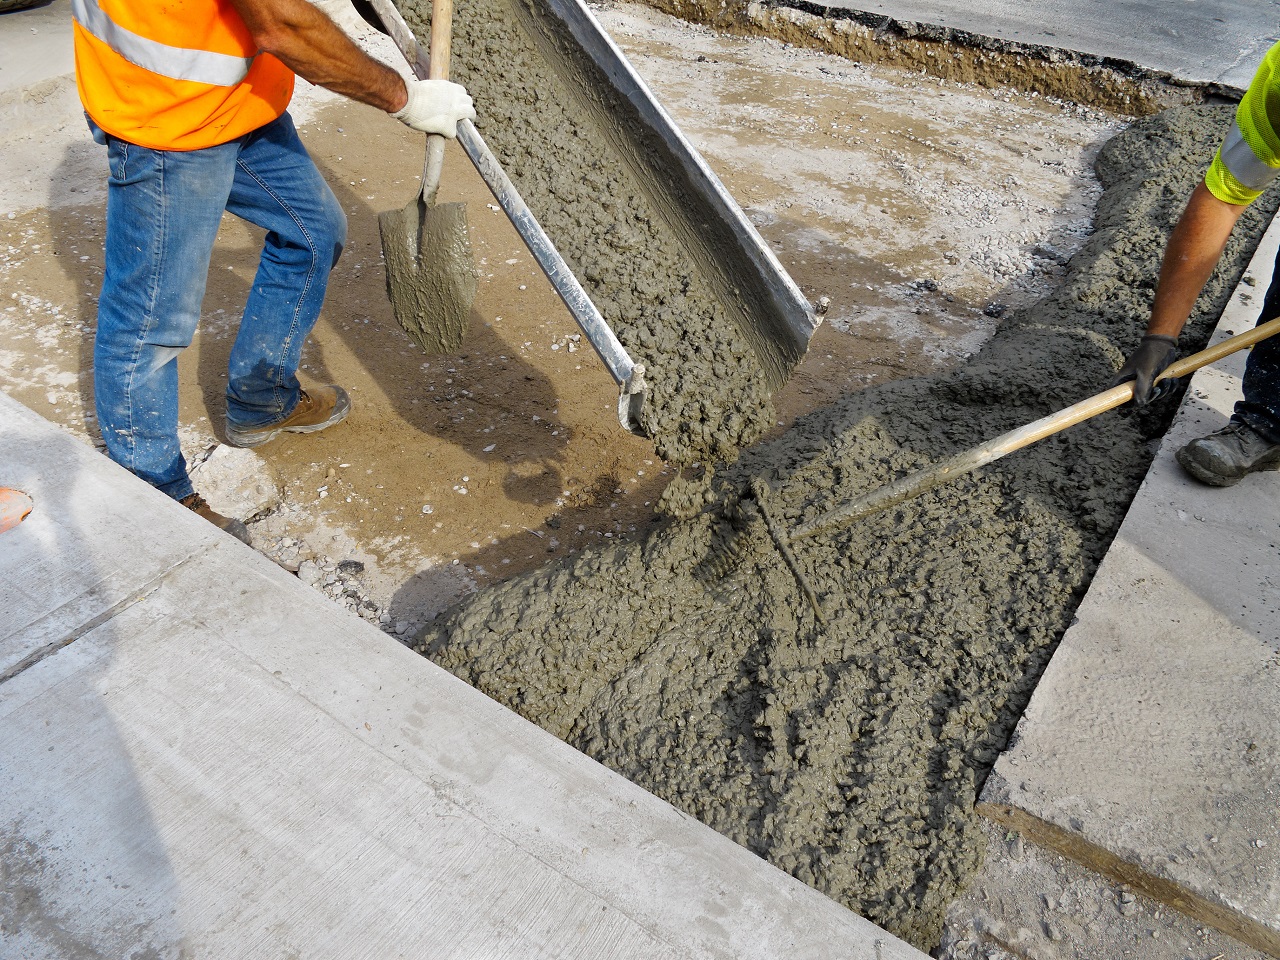 Pouring cement durung Upgrade to residential street